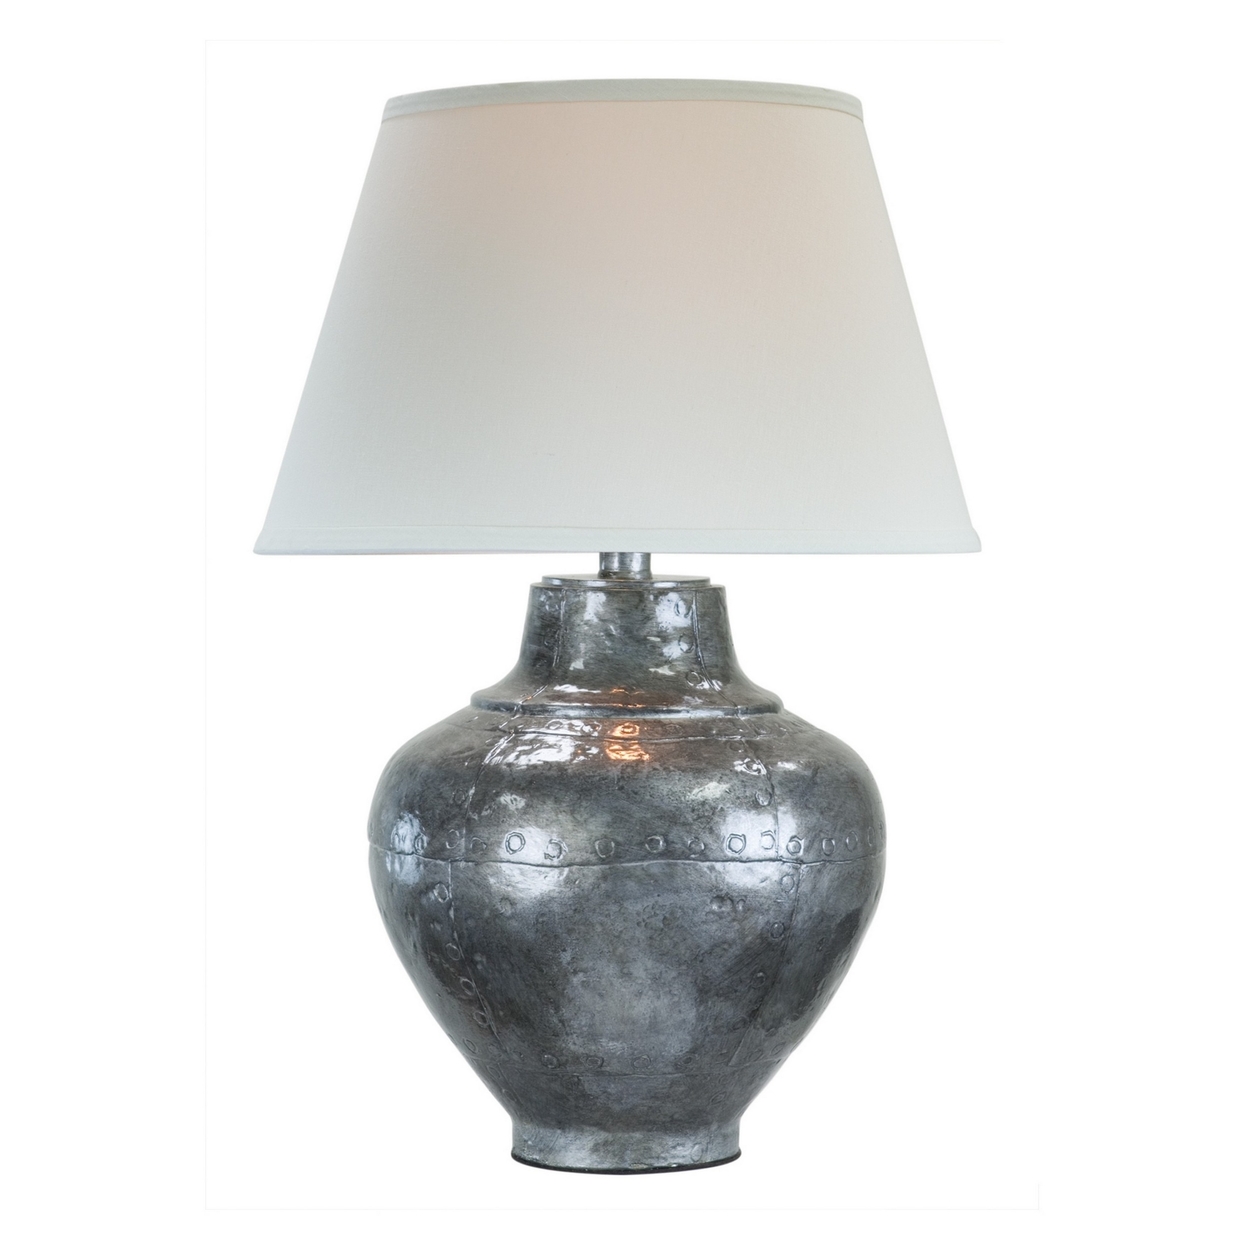 Rozy 25 Inch Table Lamp, Urn Shaped Base, Conical Shade, Industrial Silver - Saltoro Sherpi